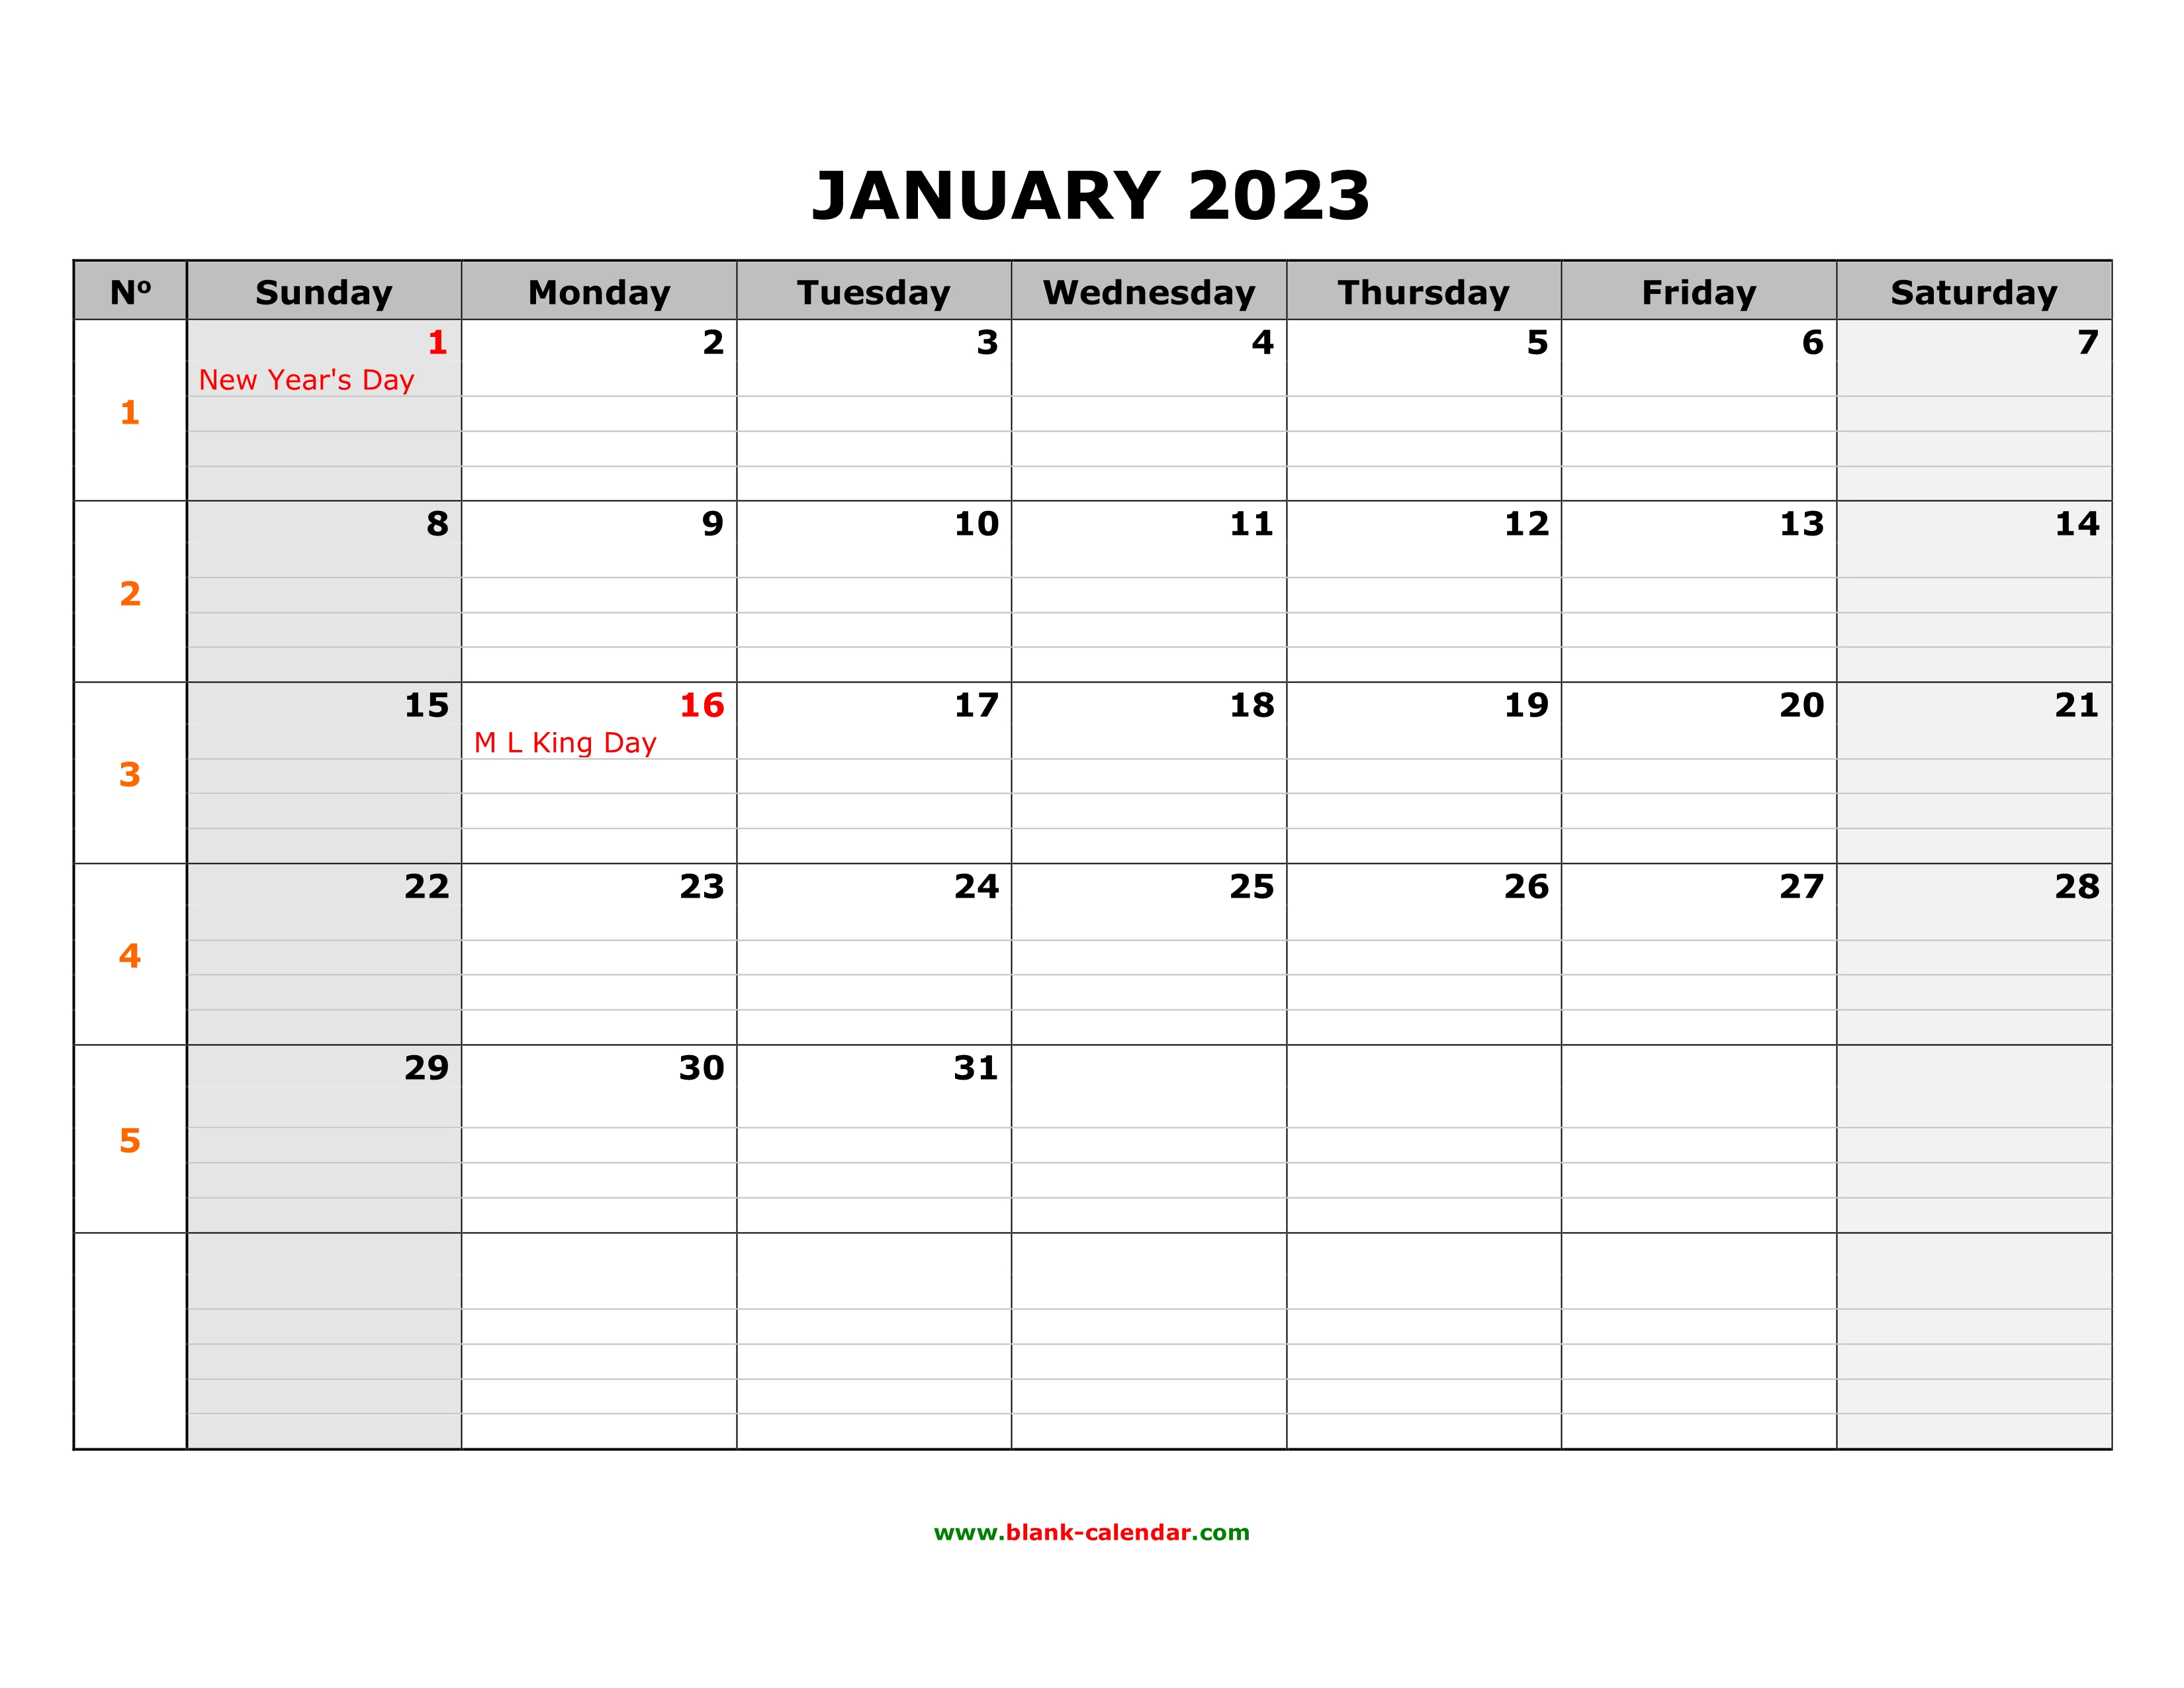 free-download-printable-calendar-2023-large-box-grid-space-for-notes